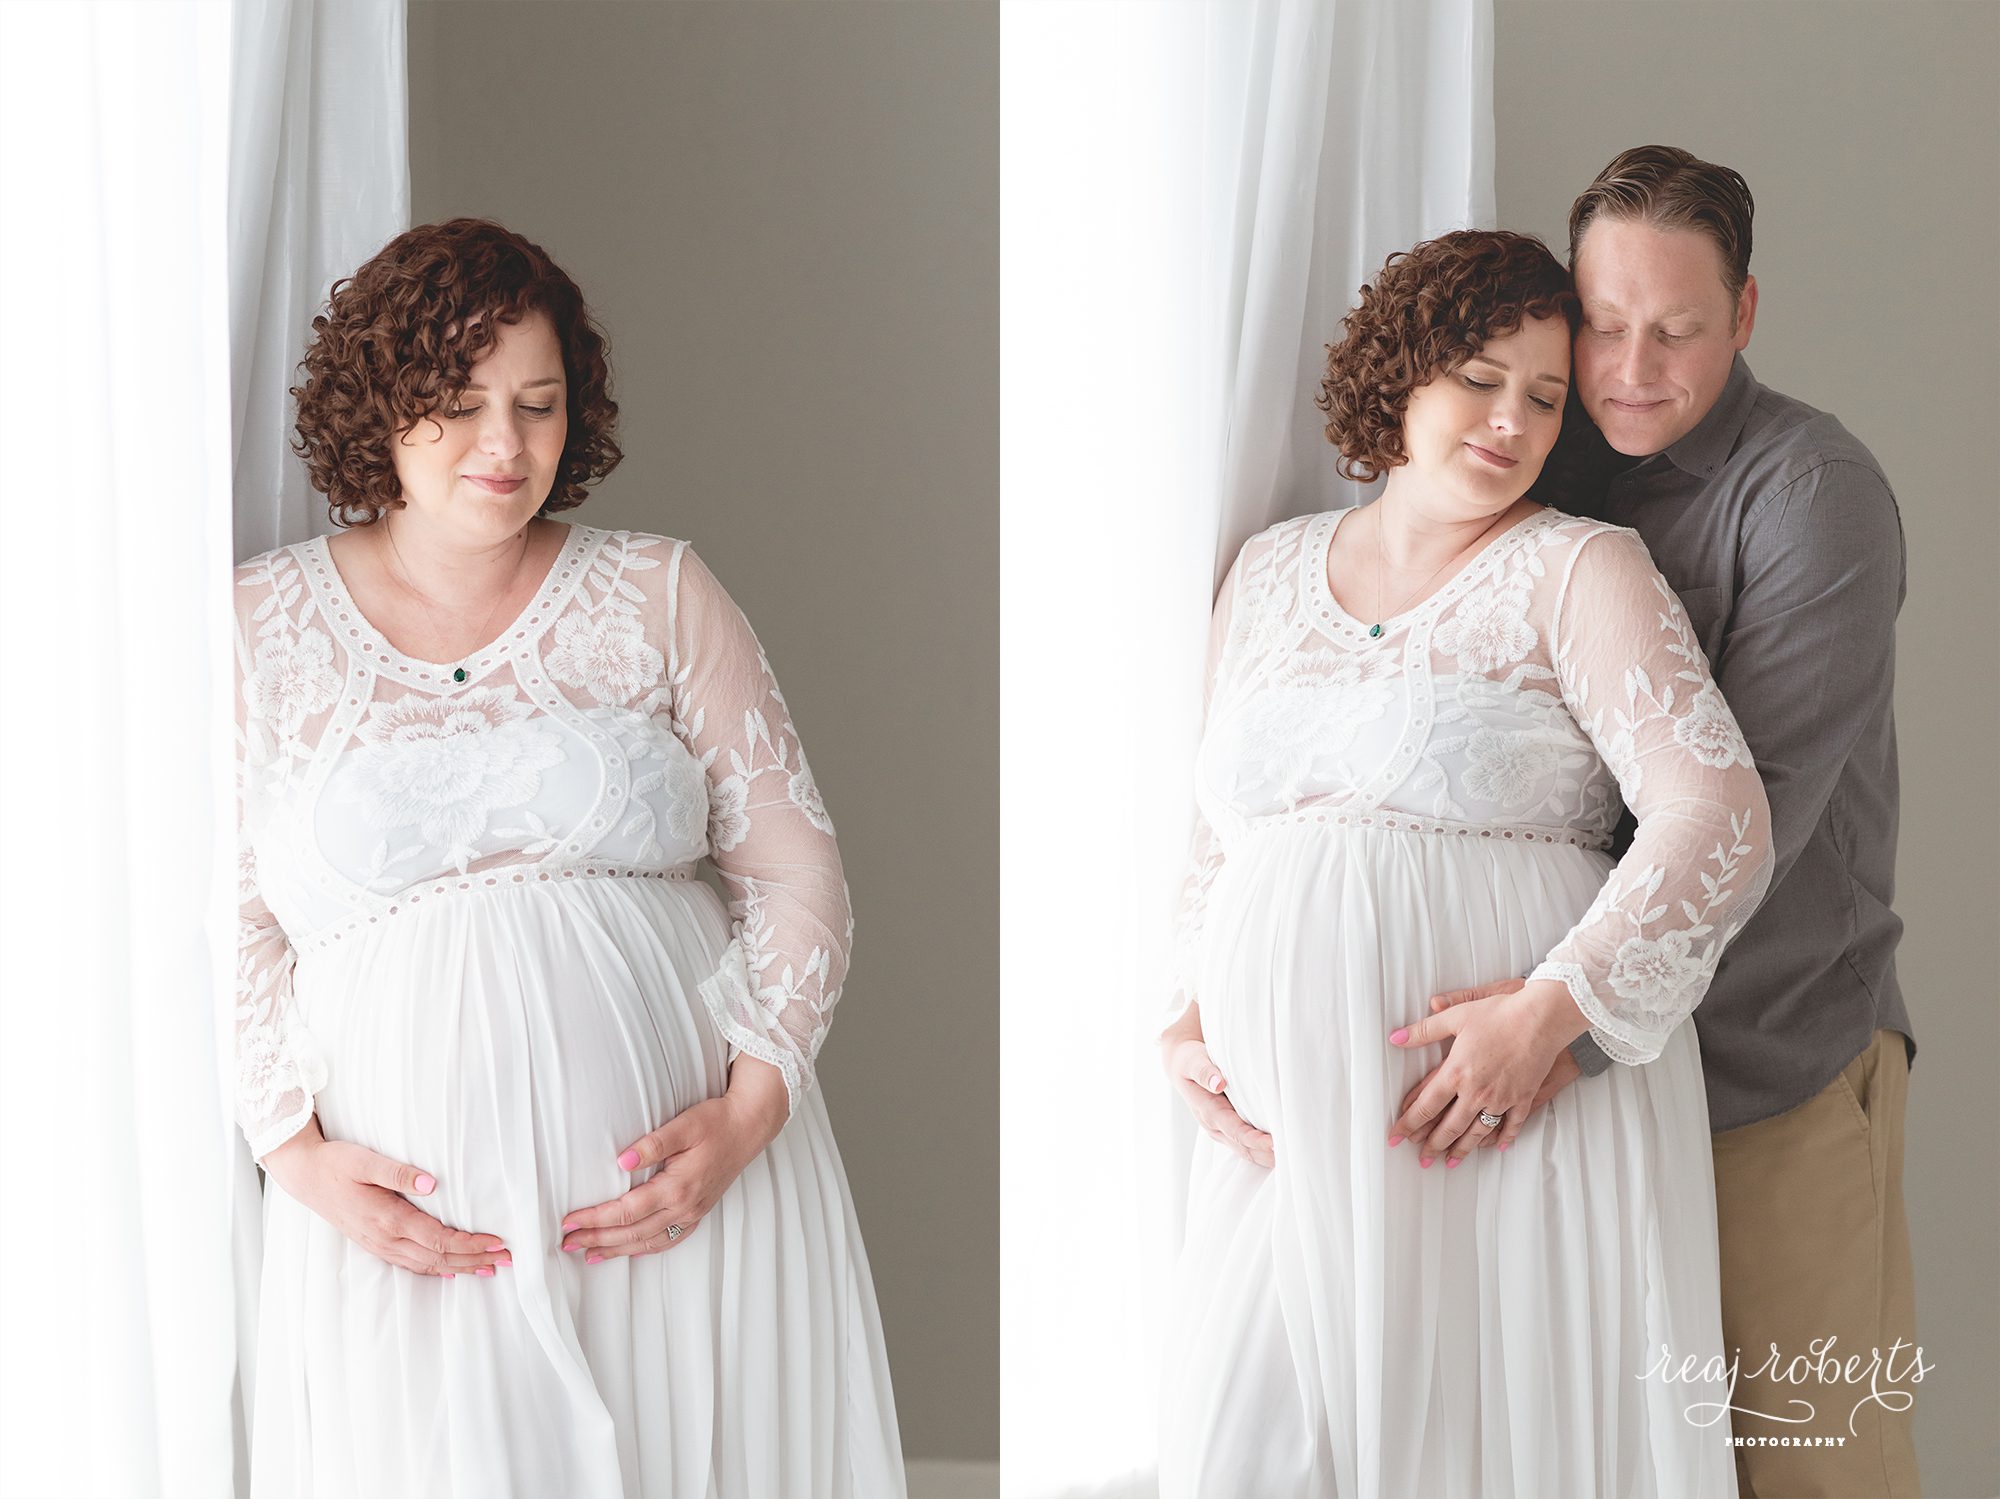 bright indoor maternity session What to wear for your maternity photo session | Reaj Roberts Photography